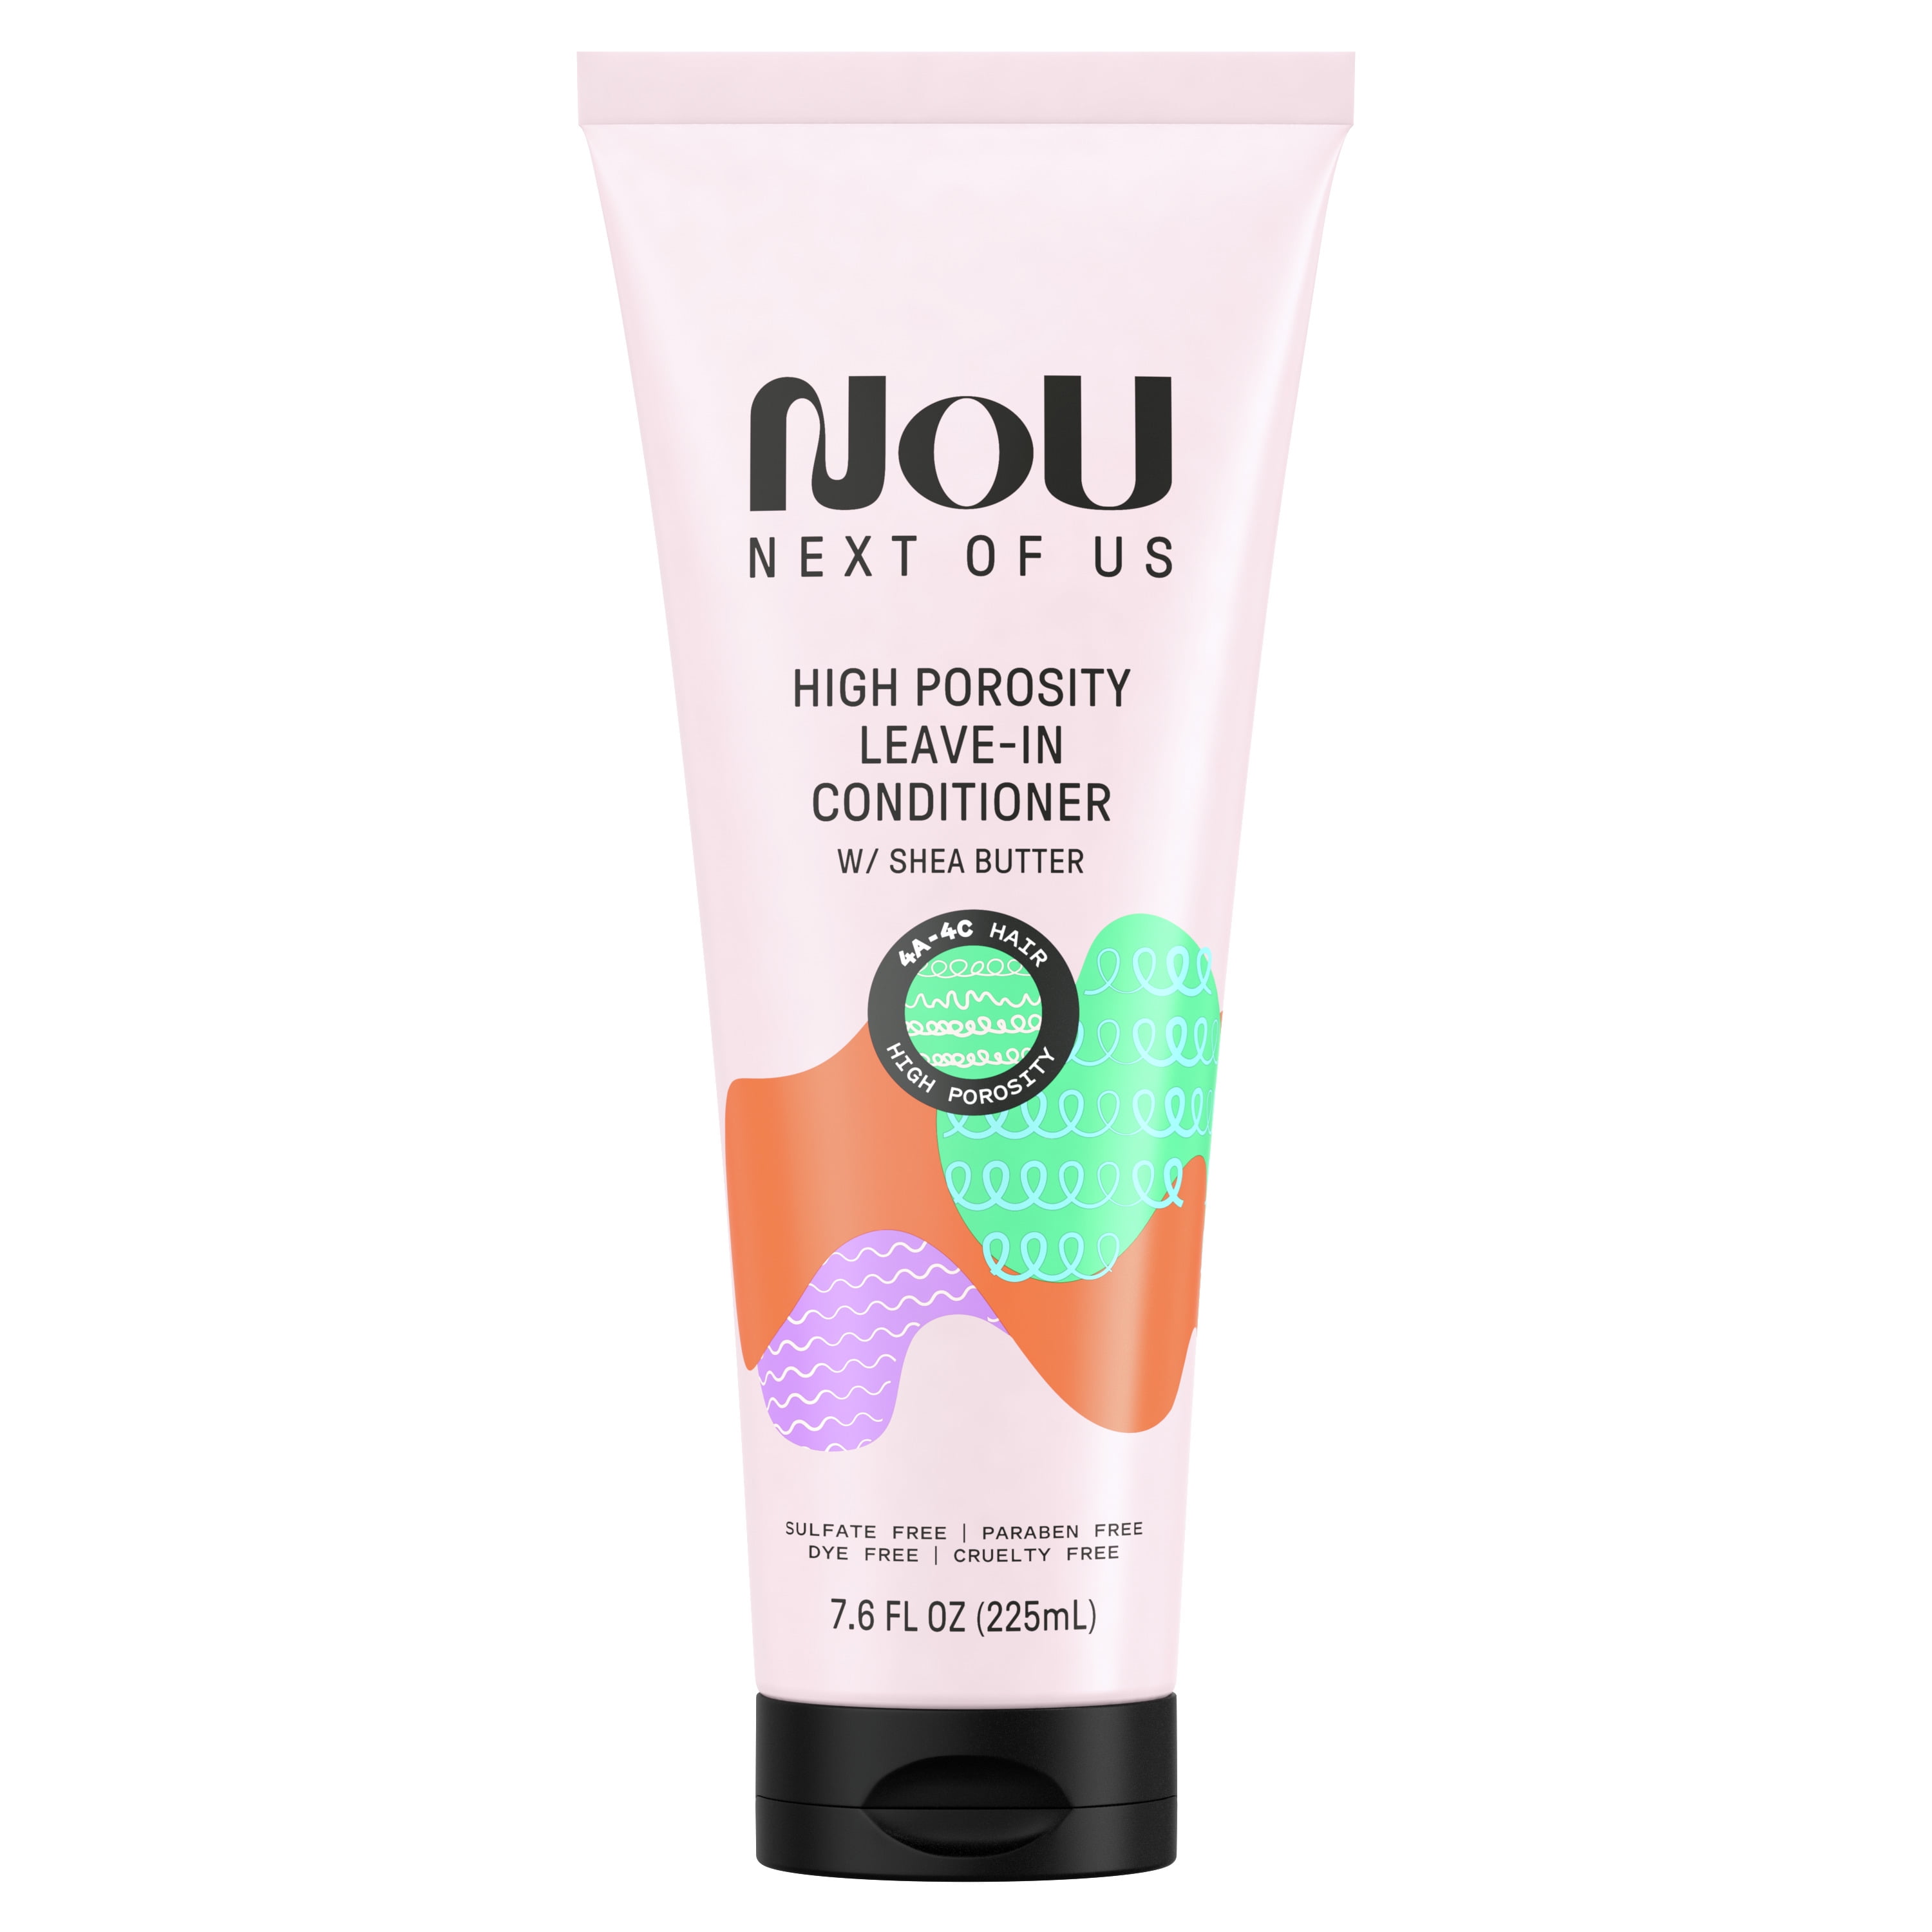 NOU High Porosity Leave-in Conditioner, For Coily Hair,  fl oz -  